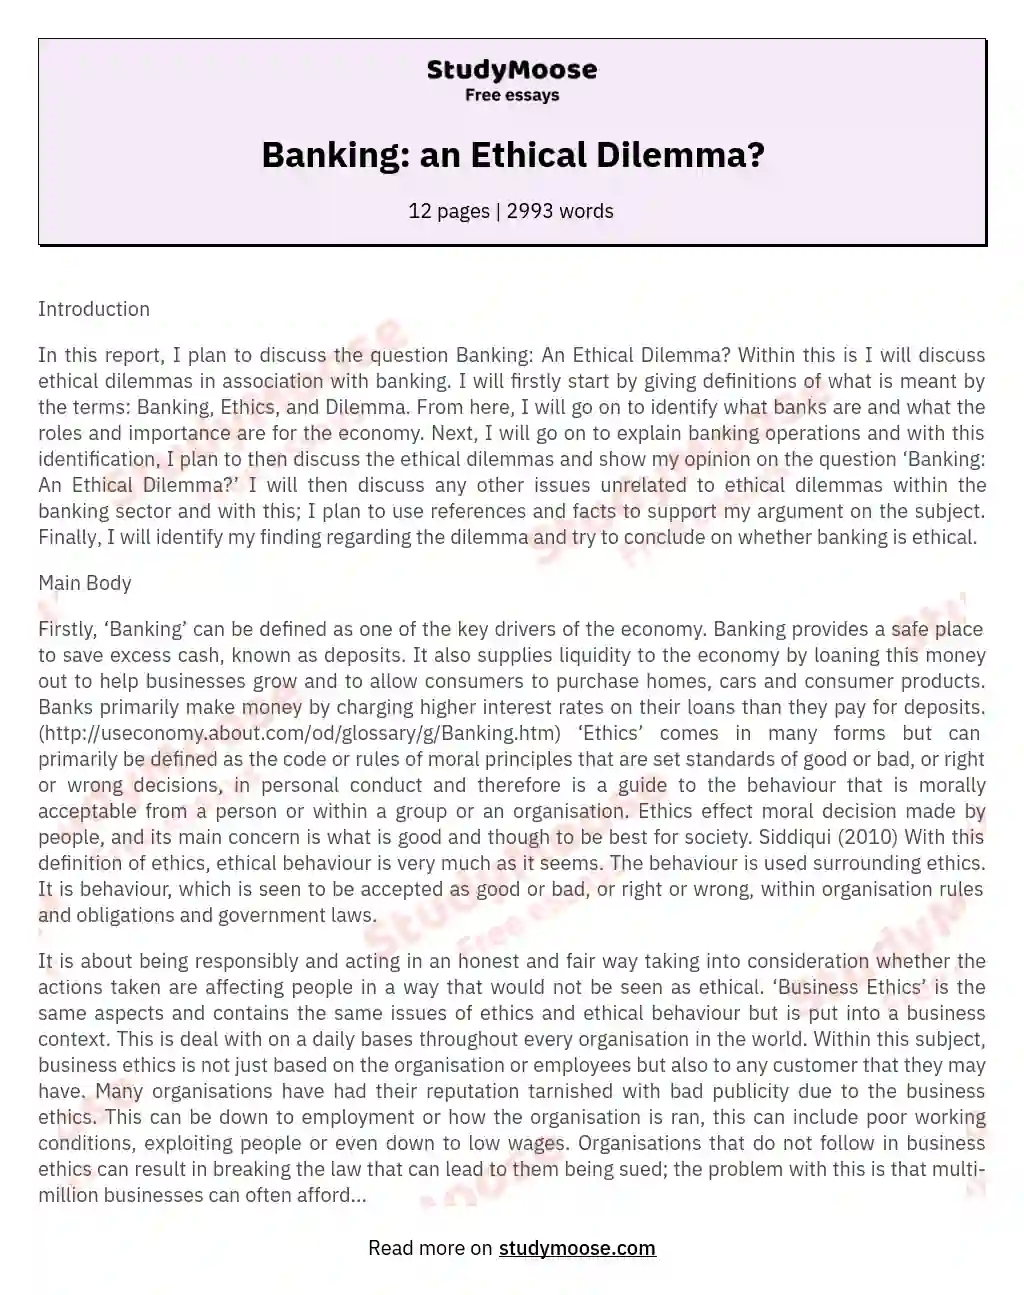 Banking: an Ethical Dilemma? essay